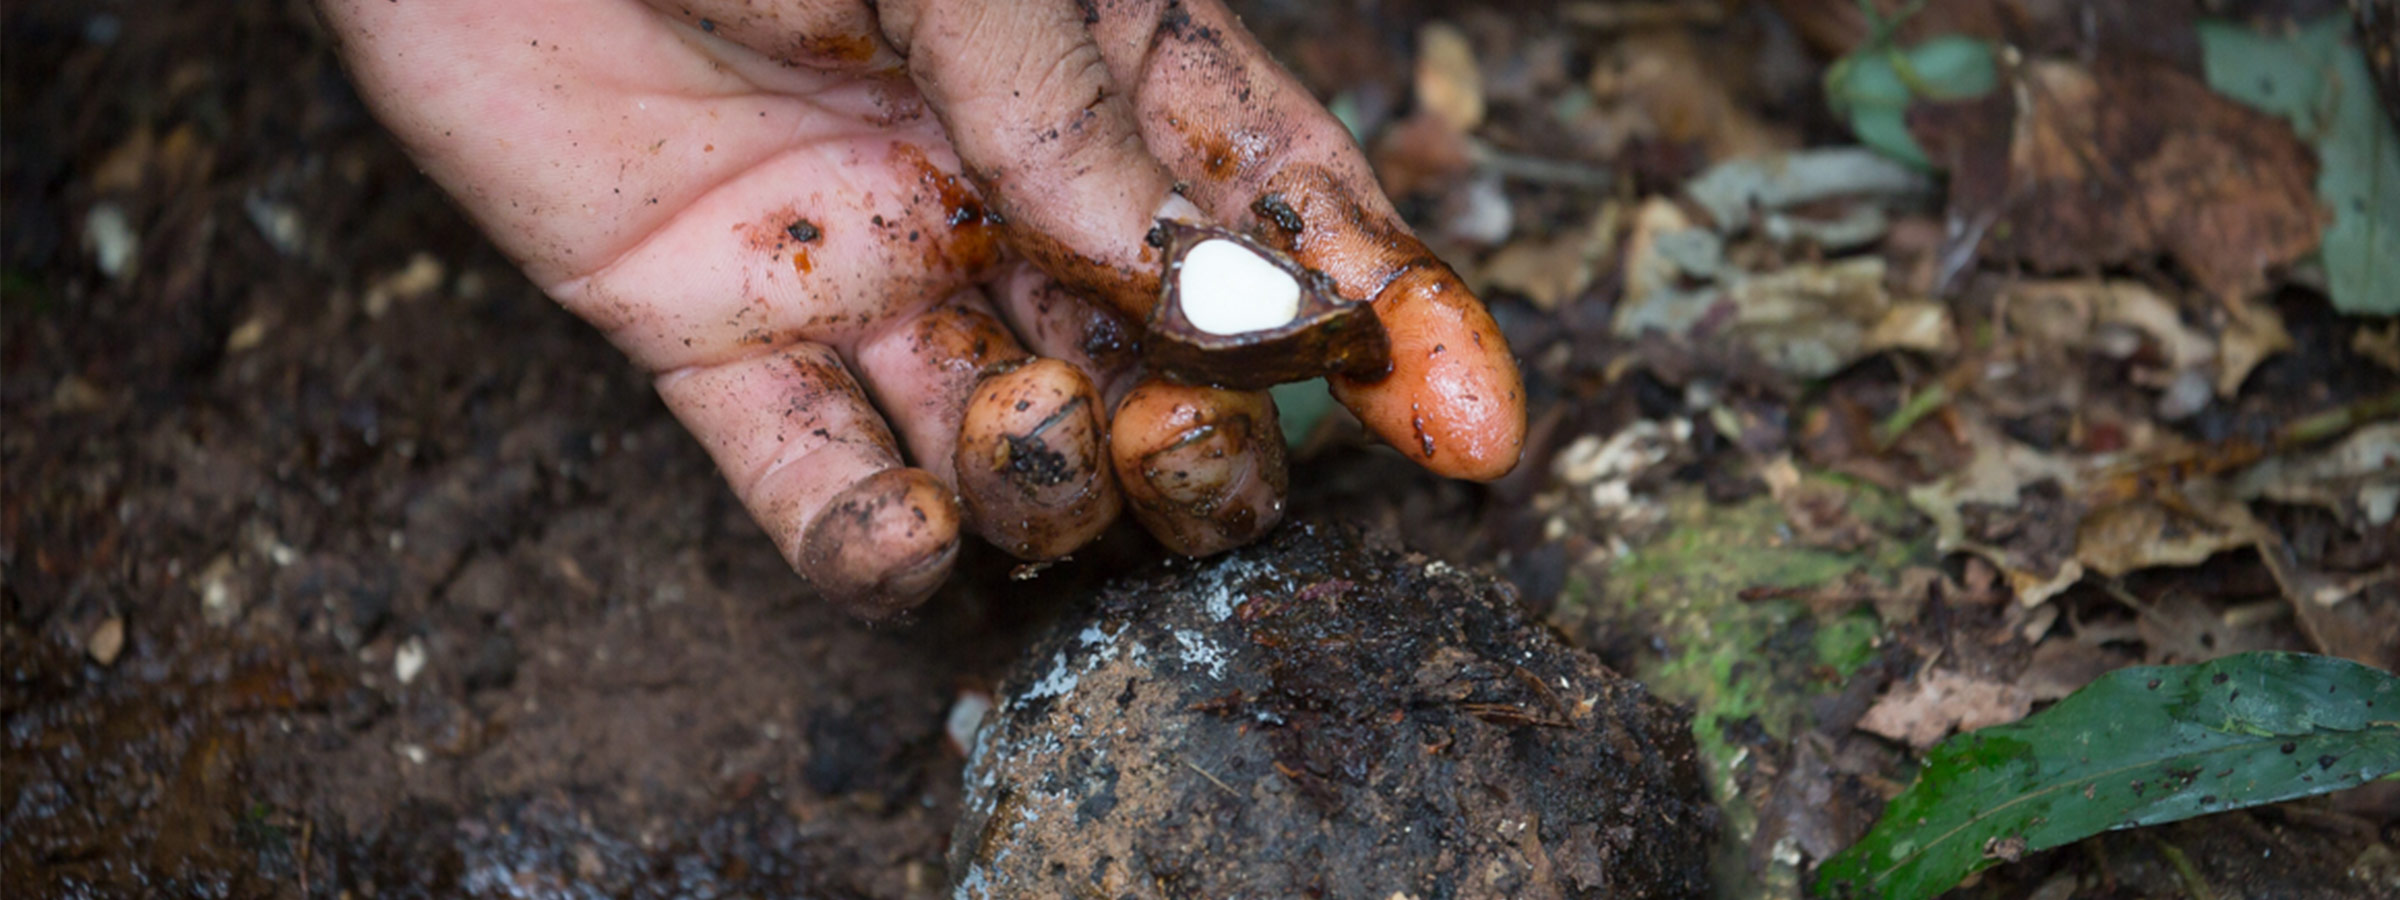 How Our Brazil Nuts Are Harvested